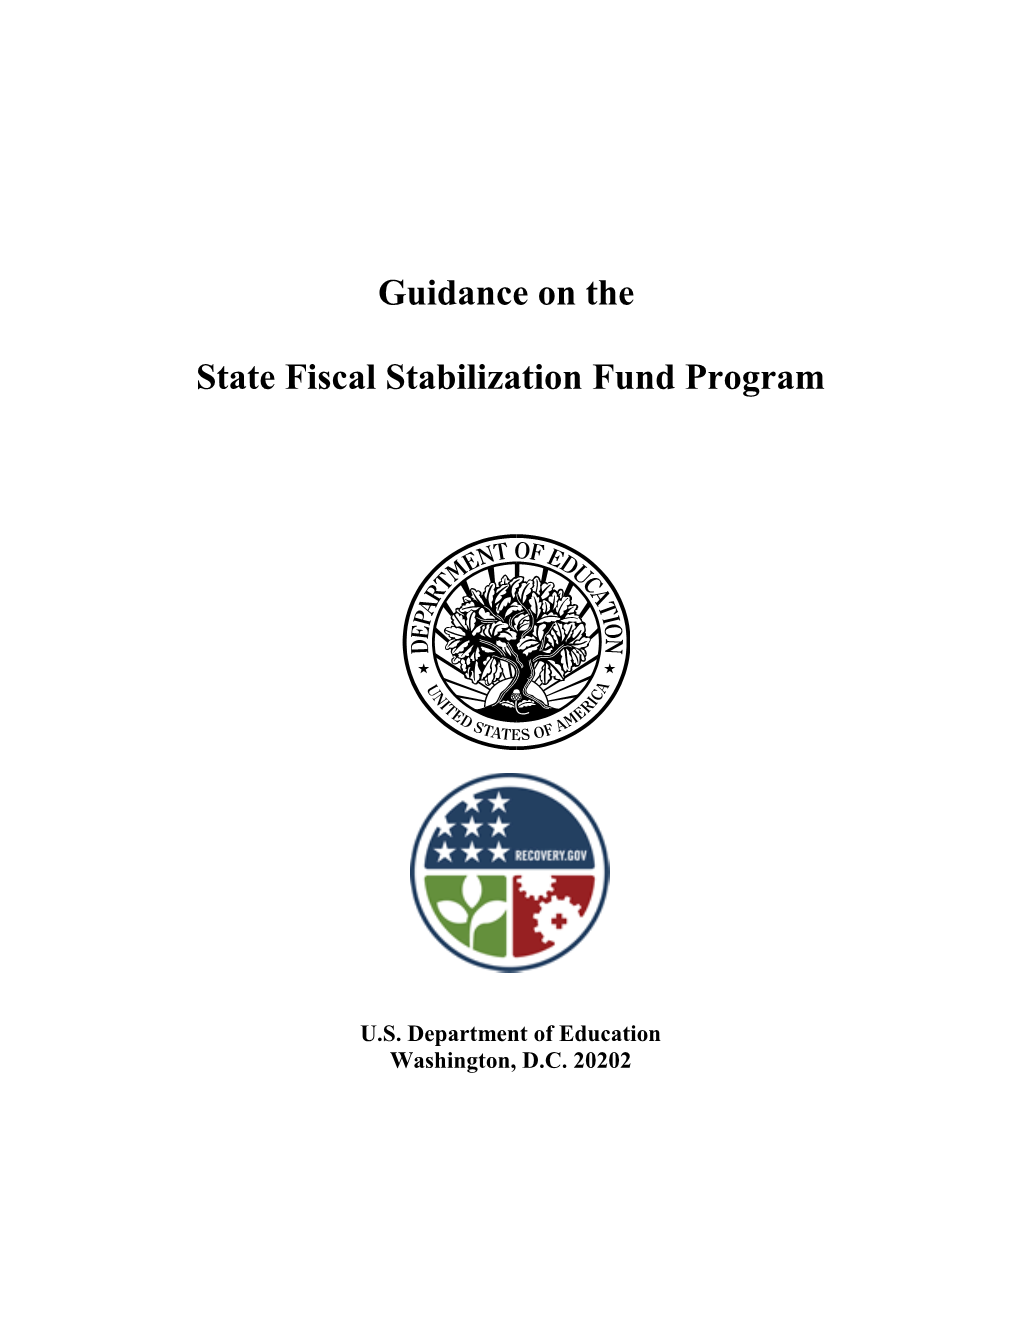 Guidance on the State Fiscal Stabilization Fund Program April 2009 (Msword)